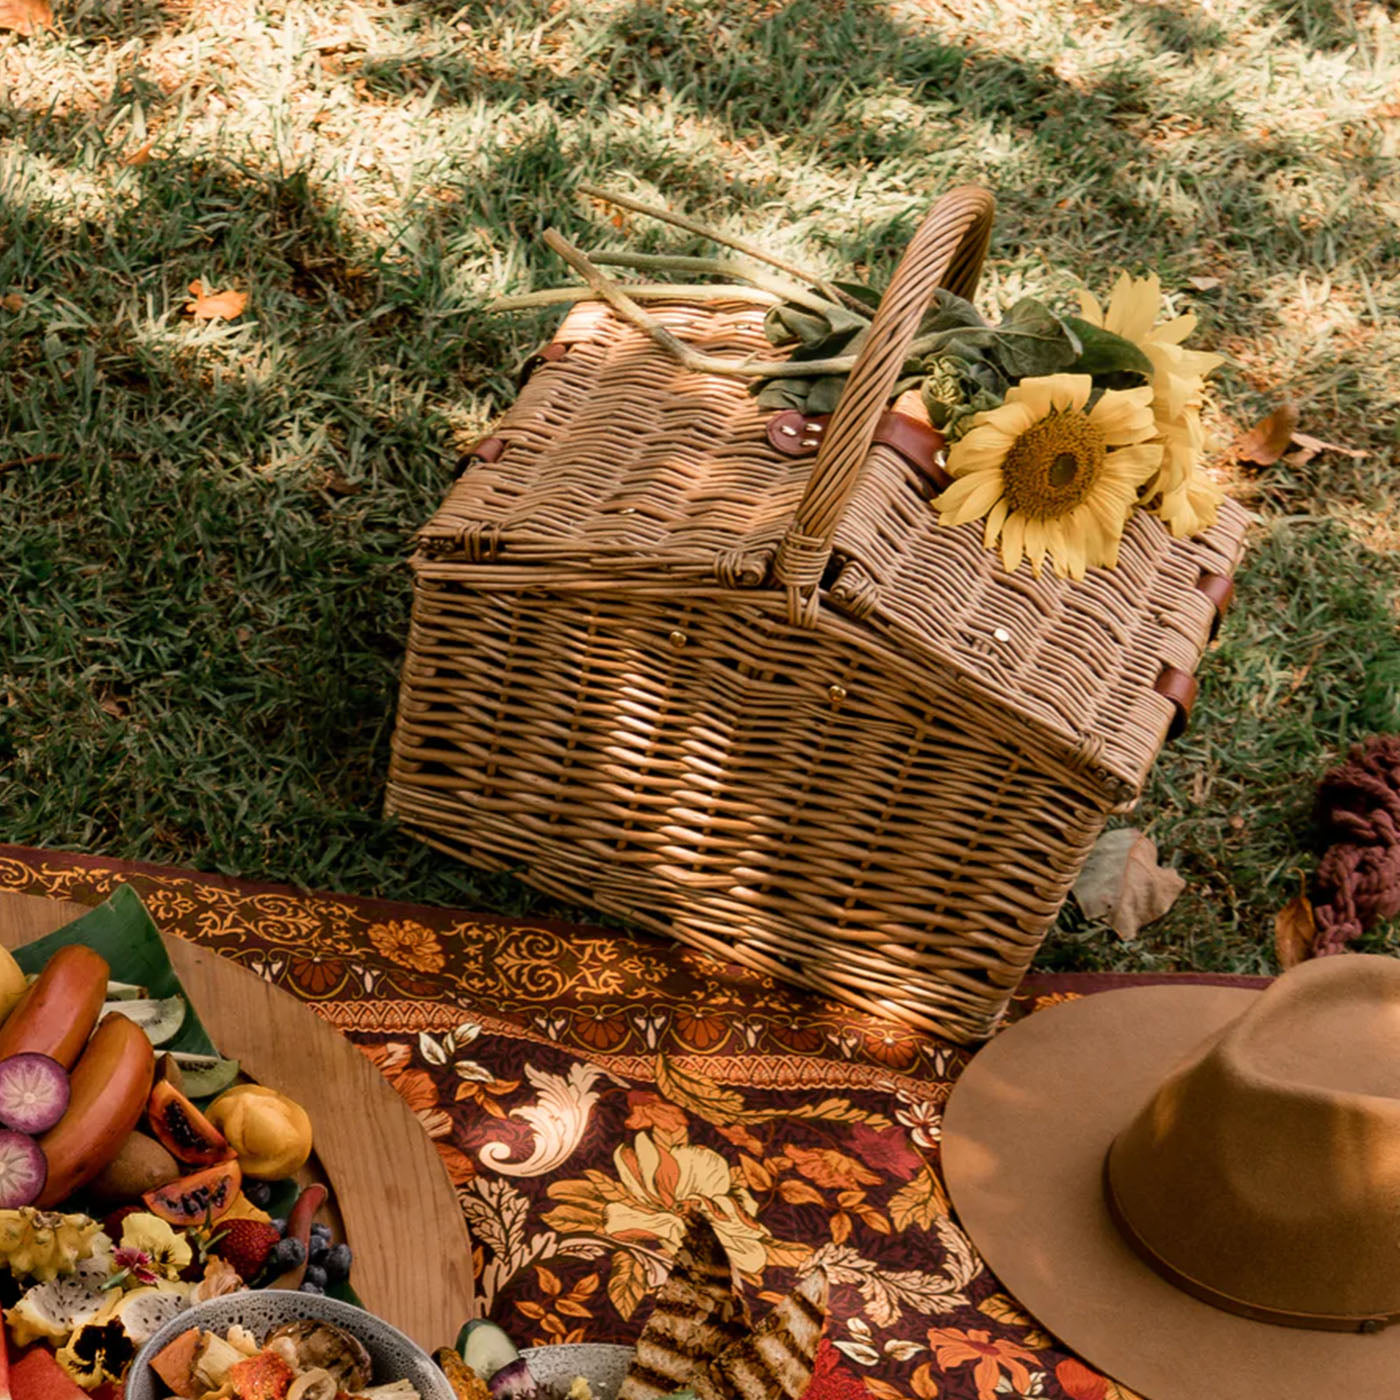 Tips for a plastic free picnic